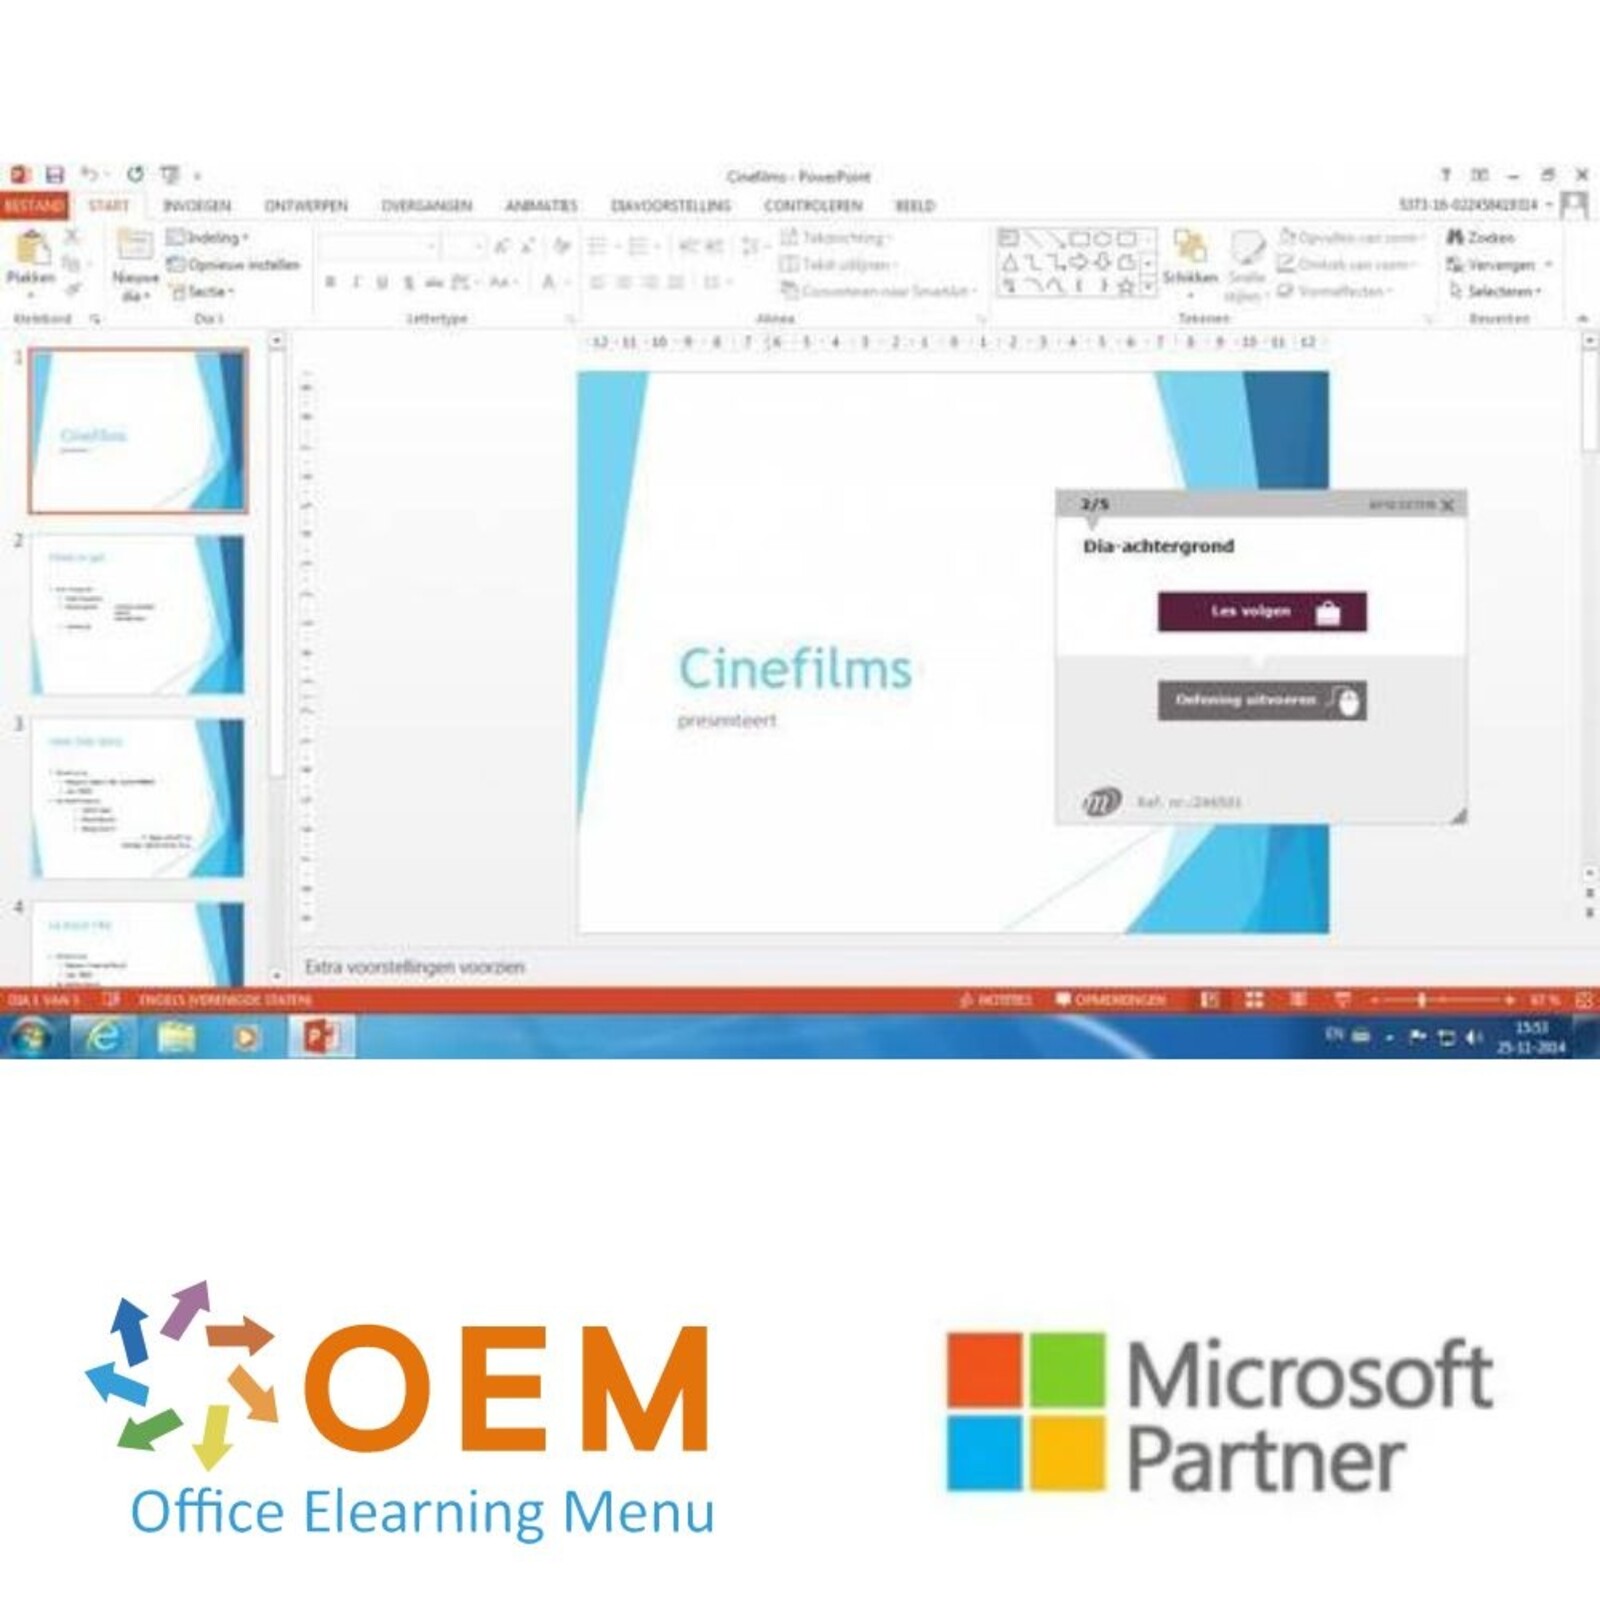 Microsoft PowerPoint PowerPoint 2016 Course Advanced Expert E-Learning